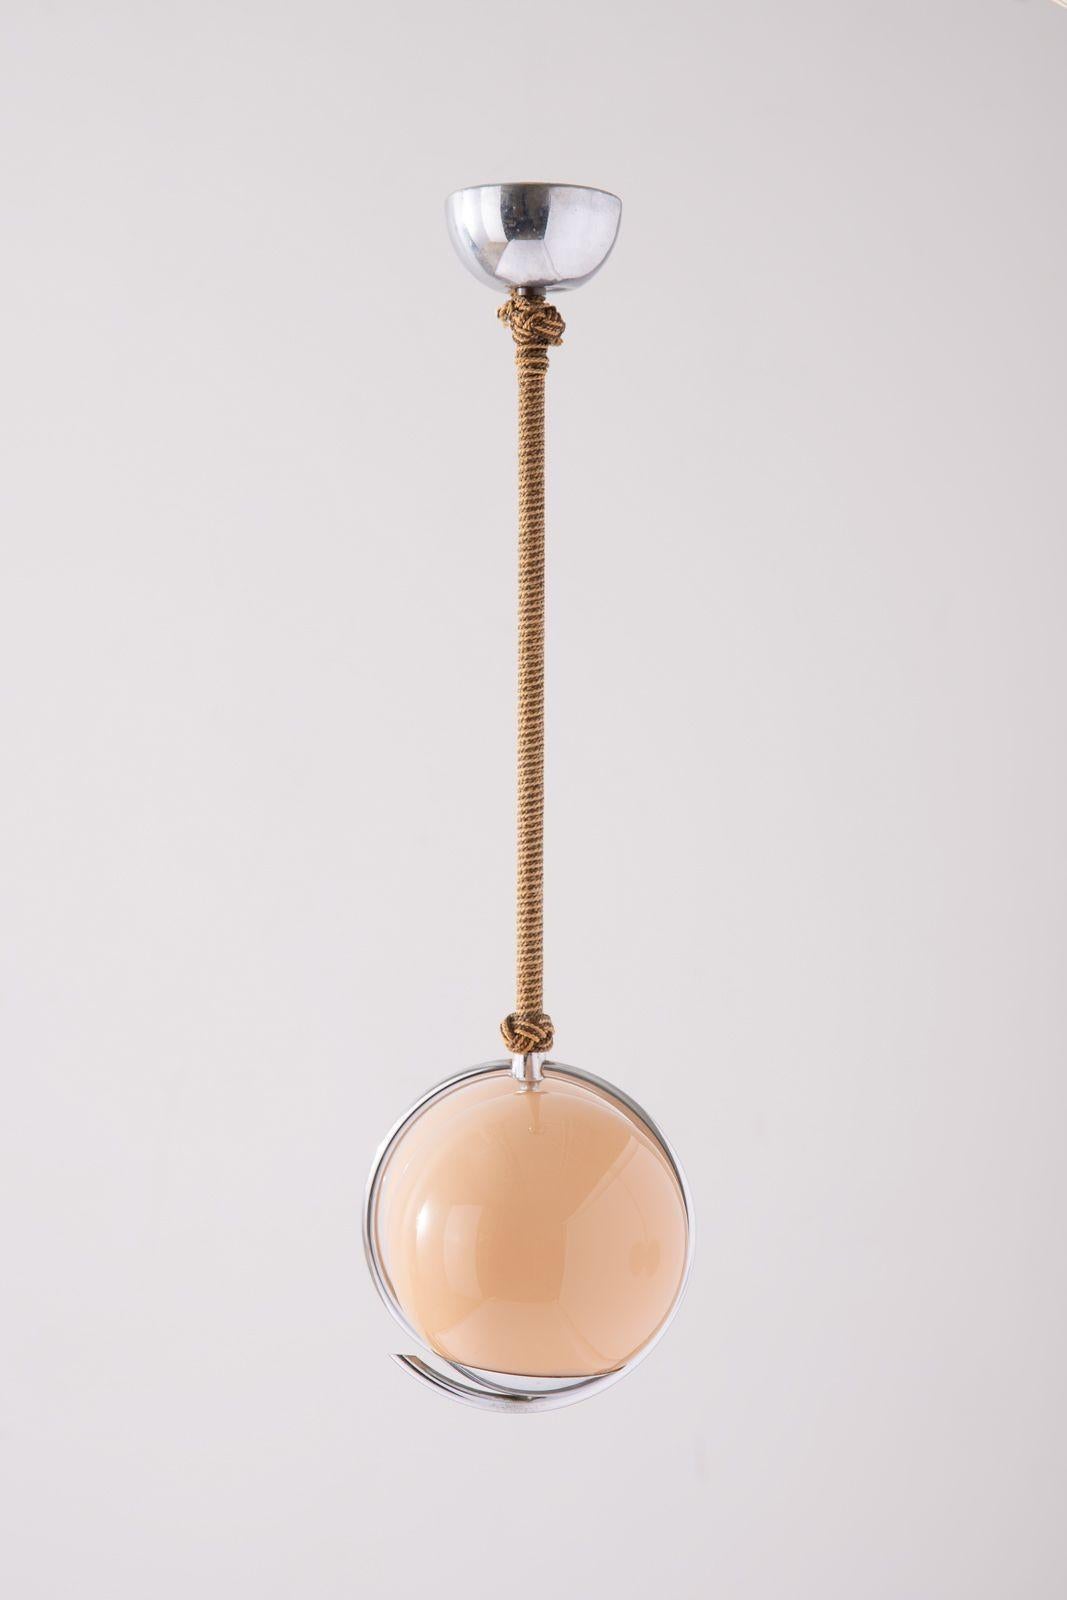 Elegant Scandinavian Pendant Lamp 1960s in Polished Nickel with Danish Cord In Good Condition For Sale In Dallas, TX